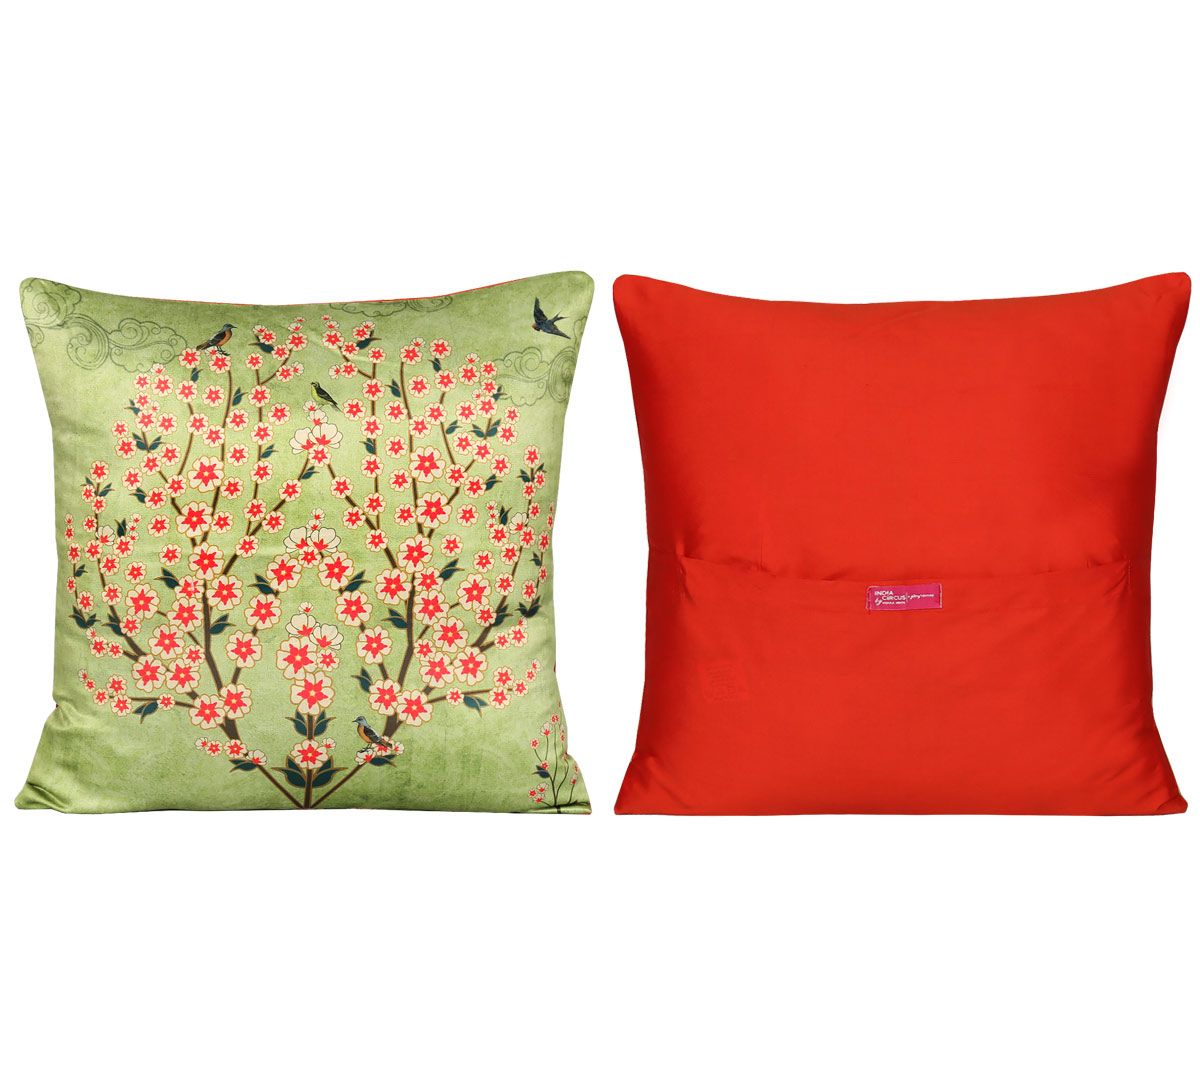 Bougainvillea Delights Cushion Cover Set of 5